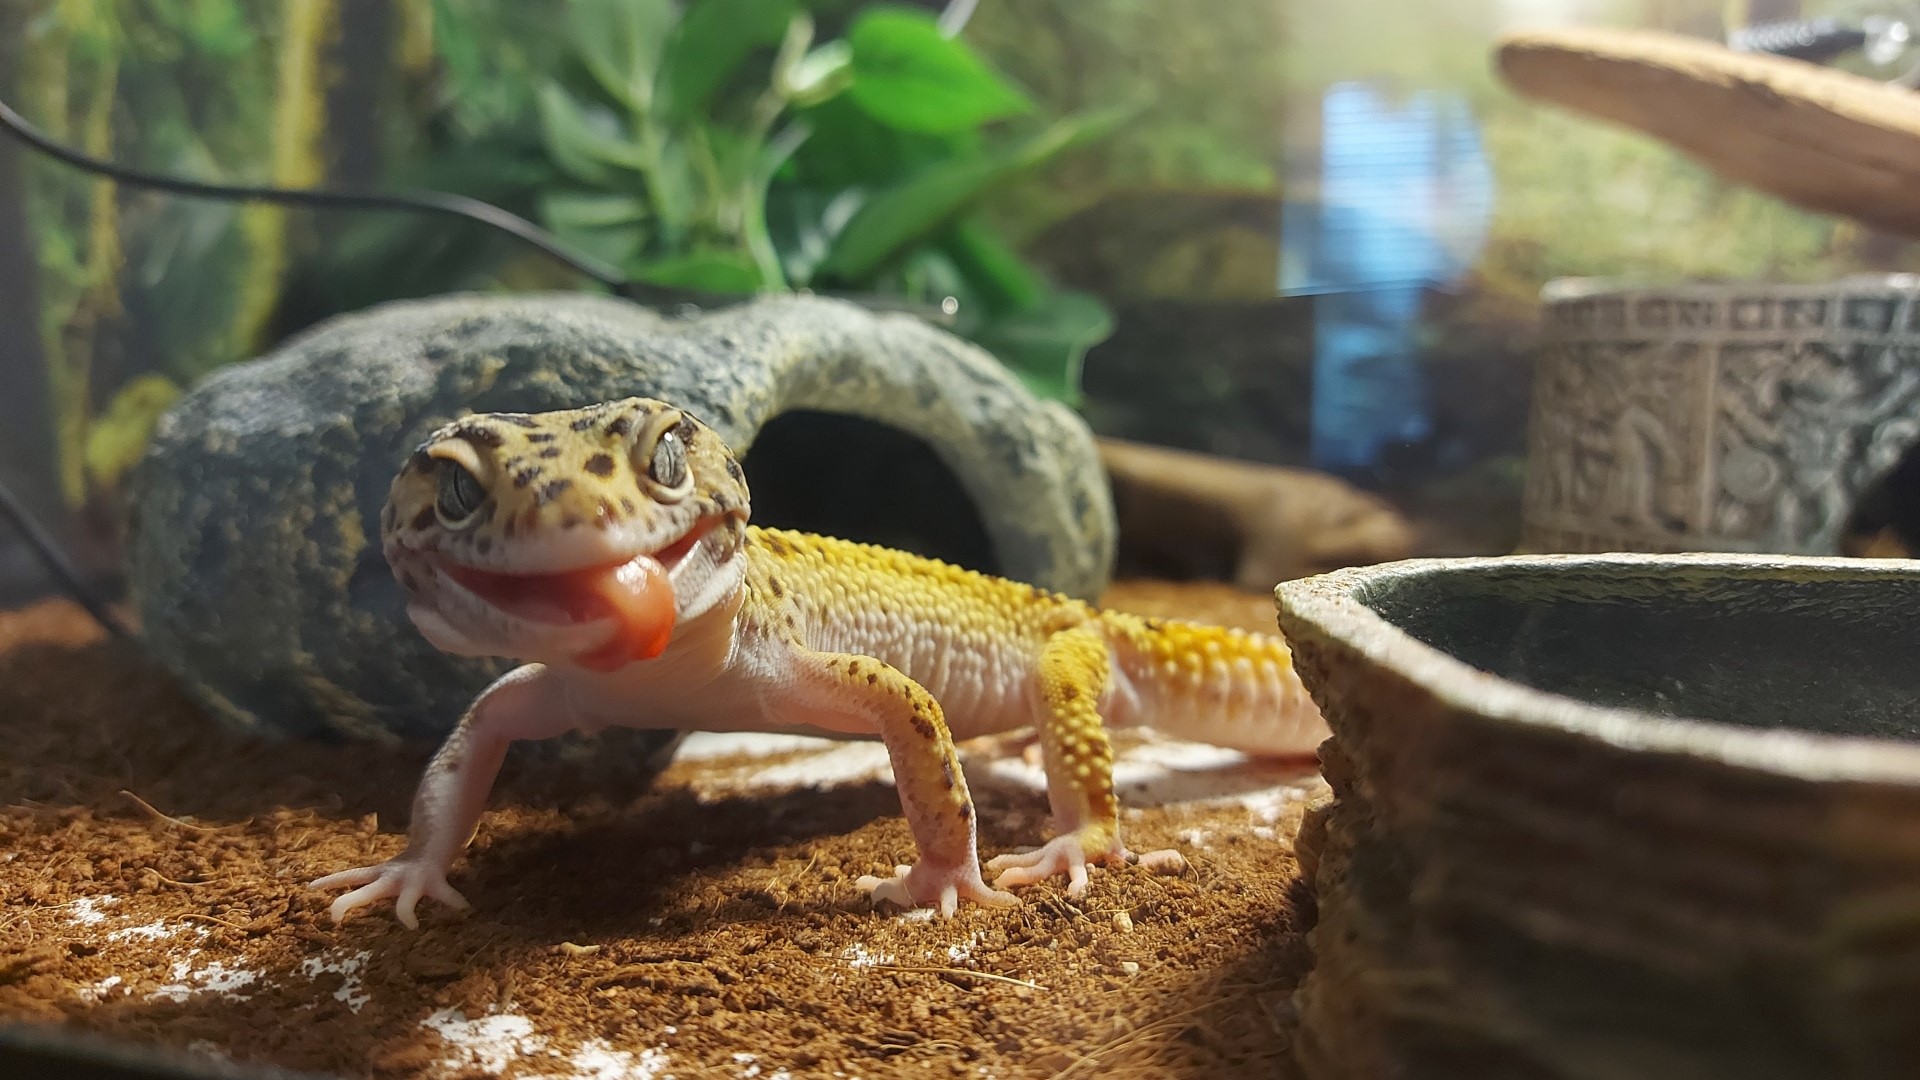 This pet leopard gecko is now memorialized as a Total Warhammer unit